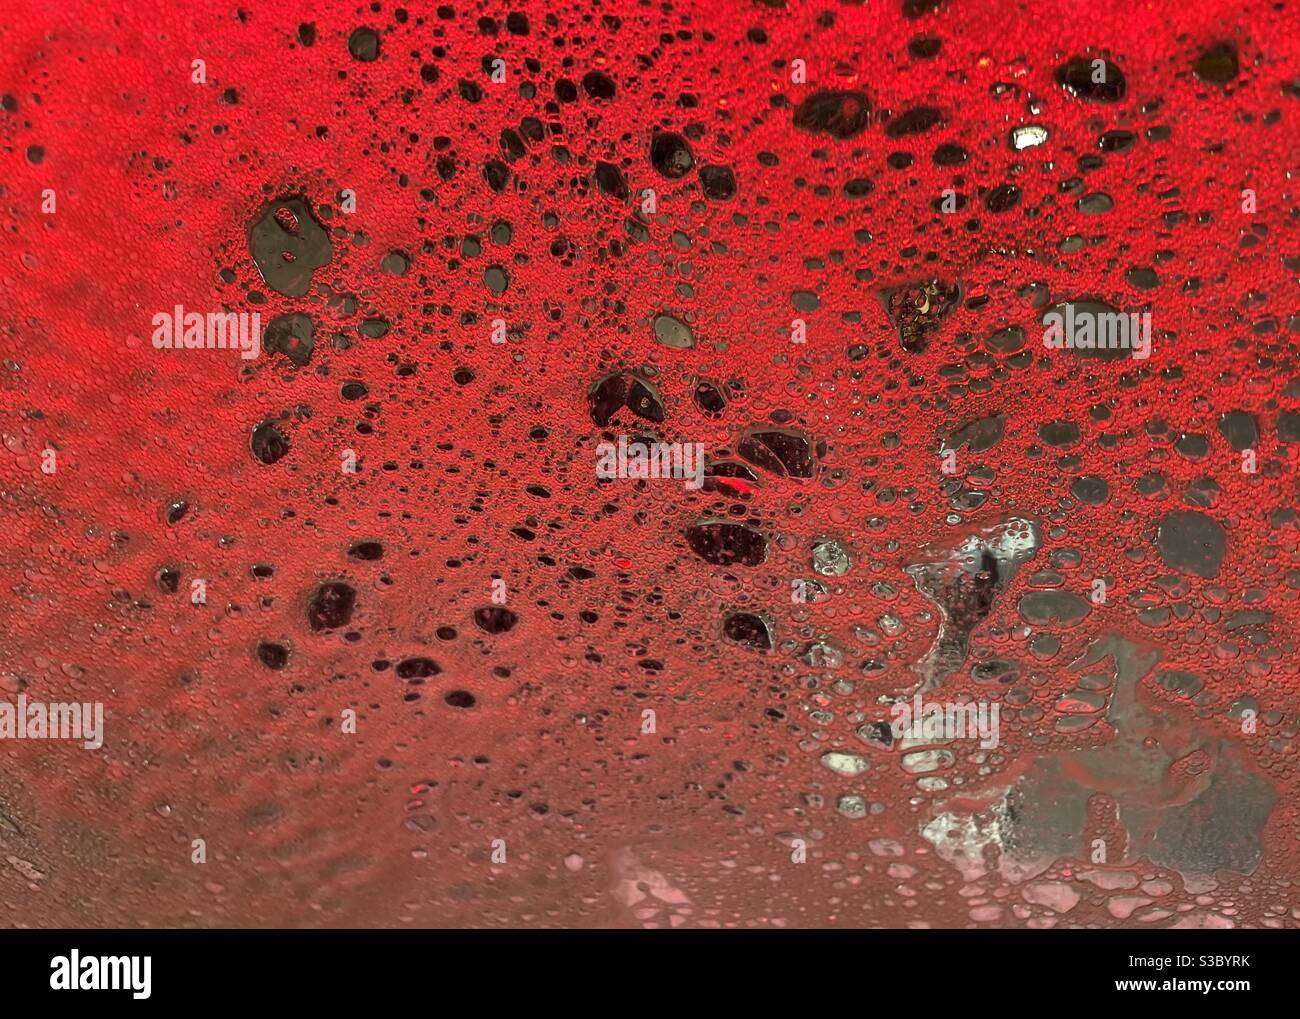 Abstract background of red soapy suds on a car windshield Stock Photo